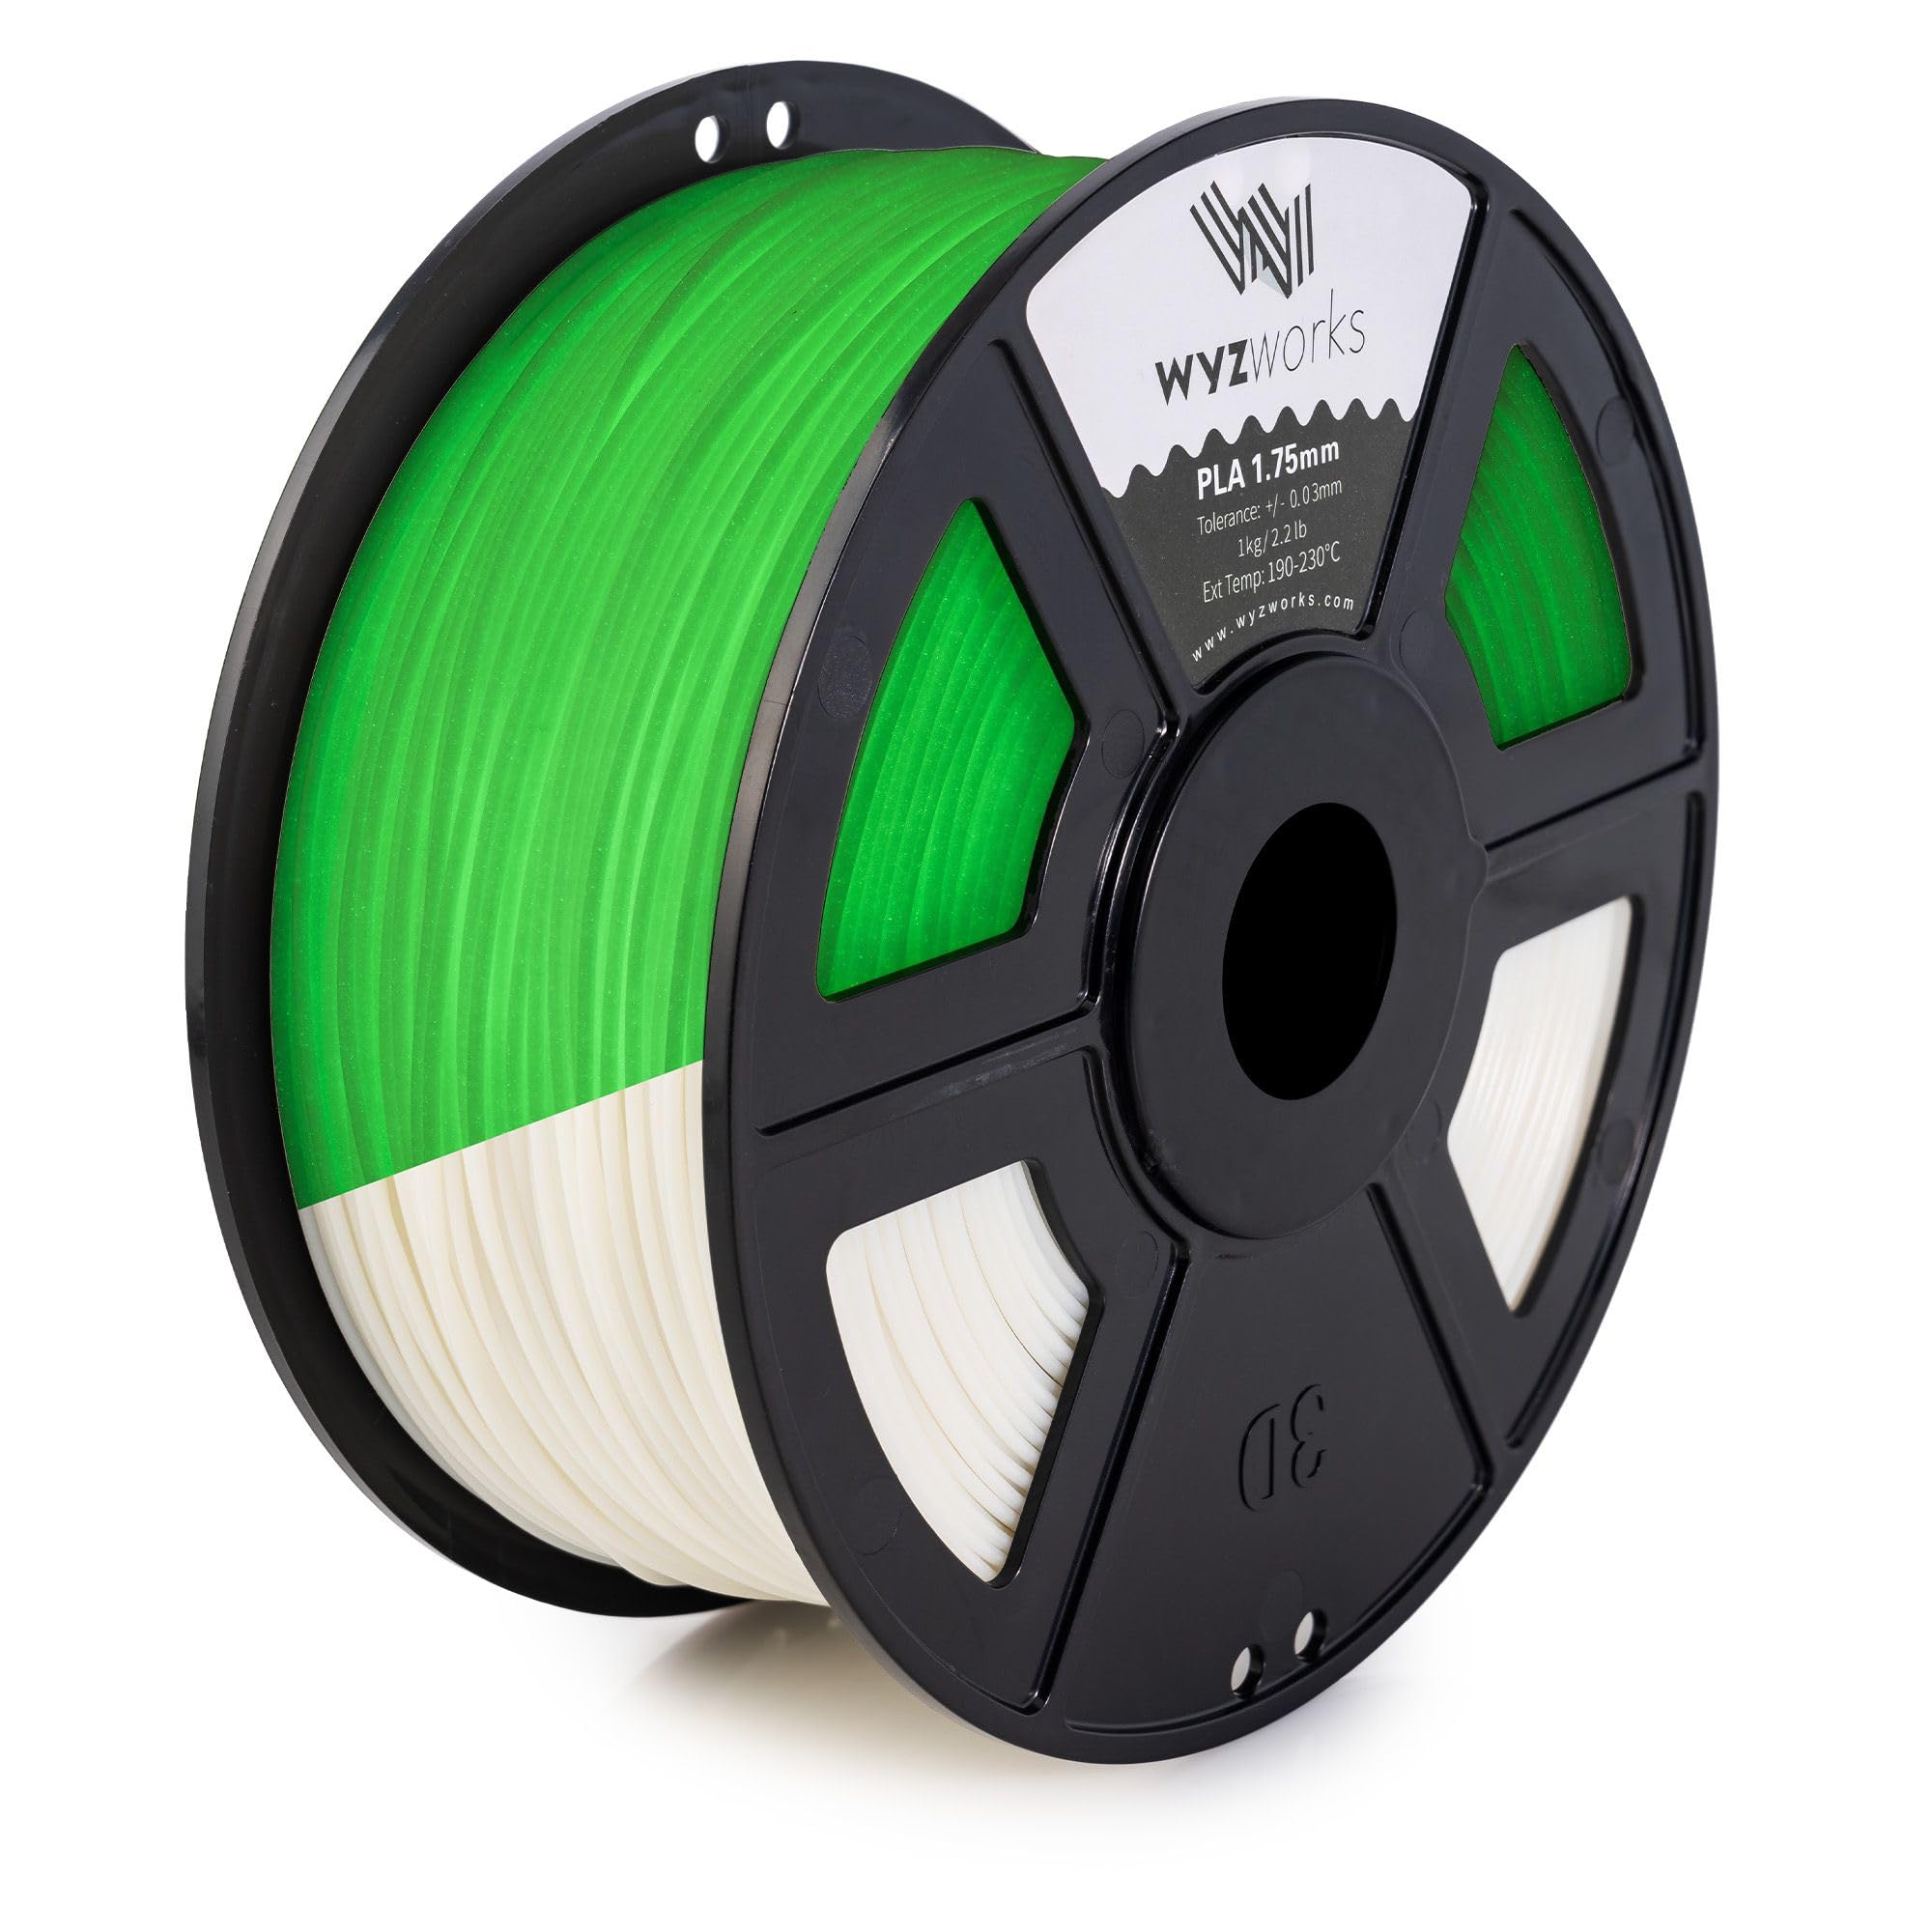 WYZworks PLA 1.75mm [White Glow Green] Premium Thermoplastic Polylactic Acid 3D Printer Filament - Dimensional Accuracy +/- 0.05mm 1kg / 2.2lb + Multiple Color Options Available